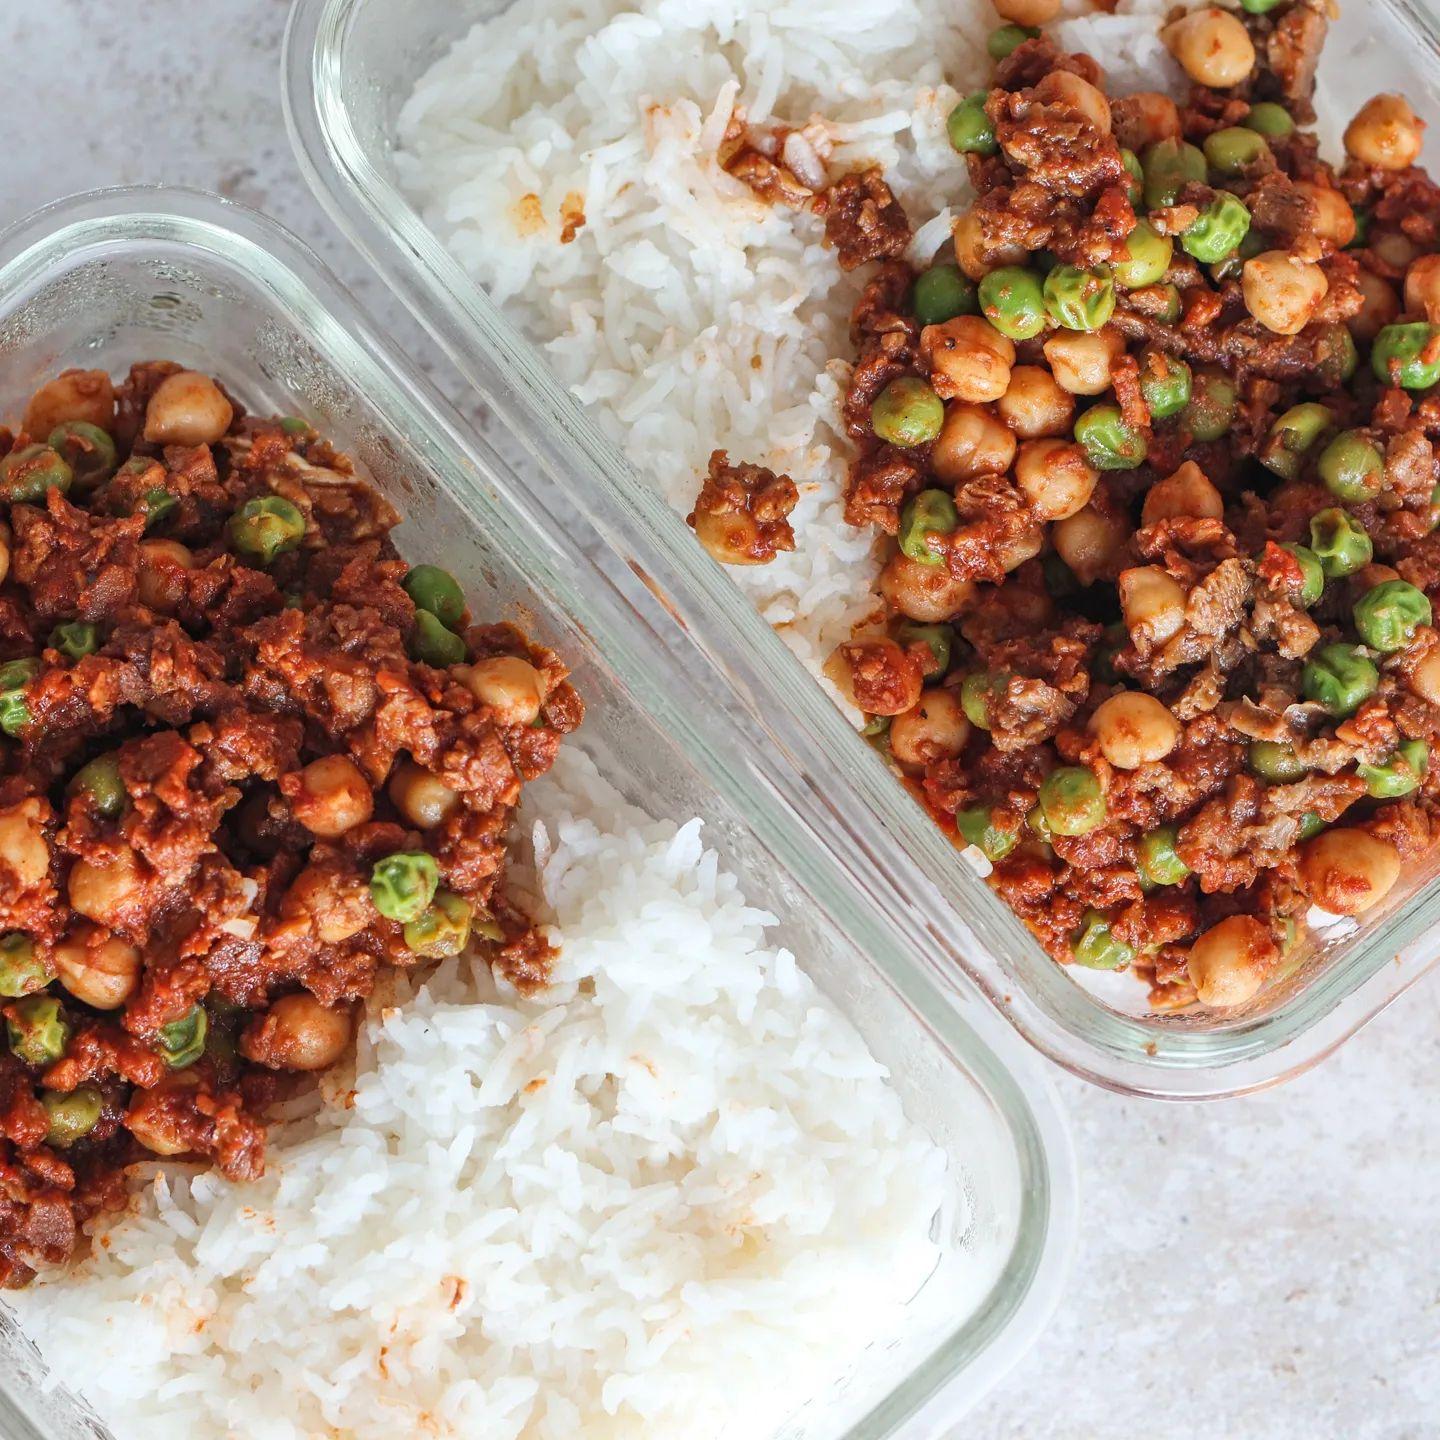 Wholesome Plant-Based Meal Prep Recipes